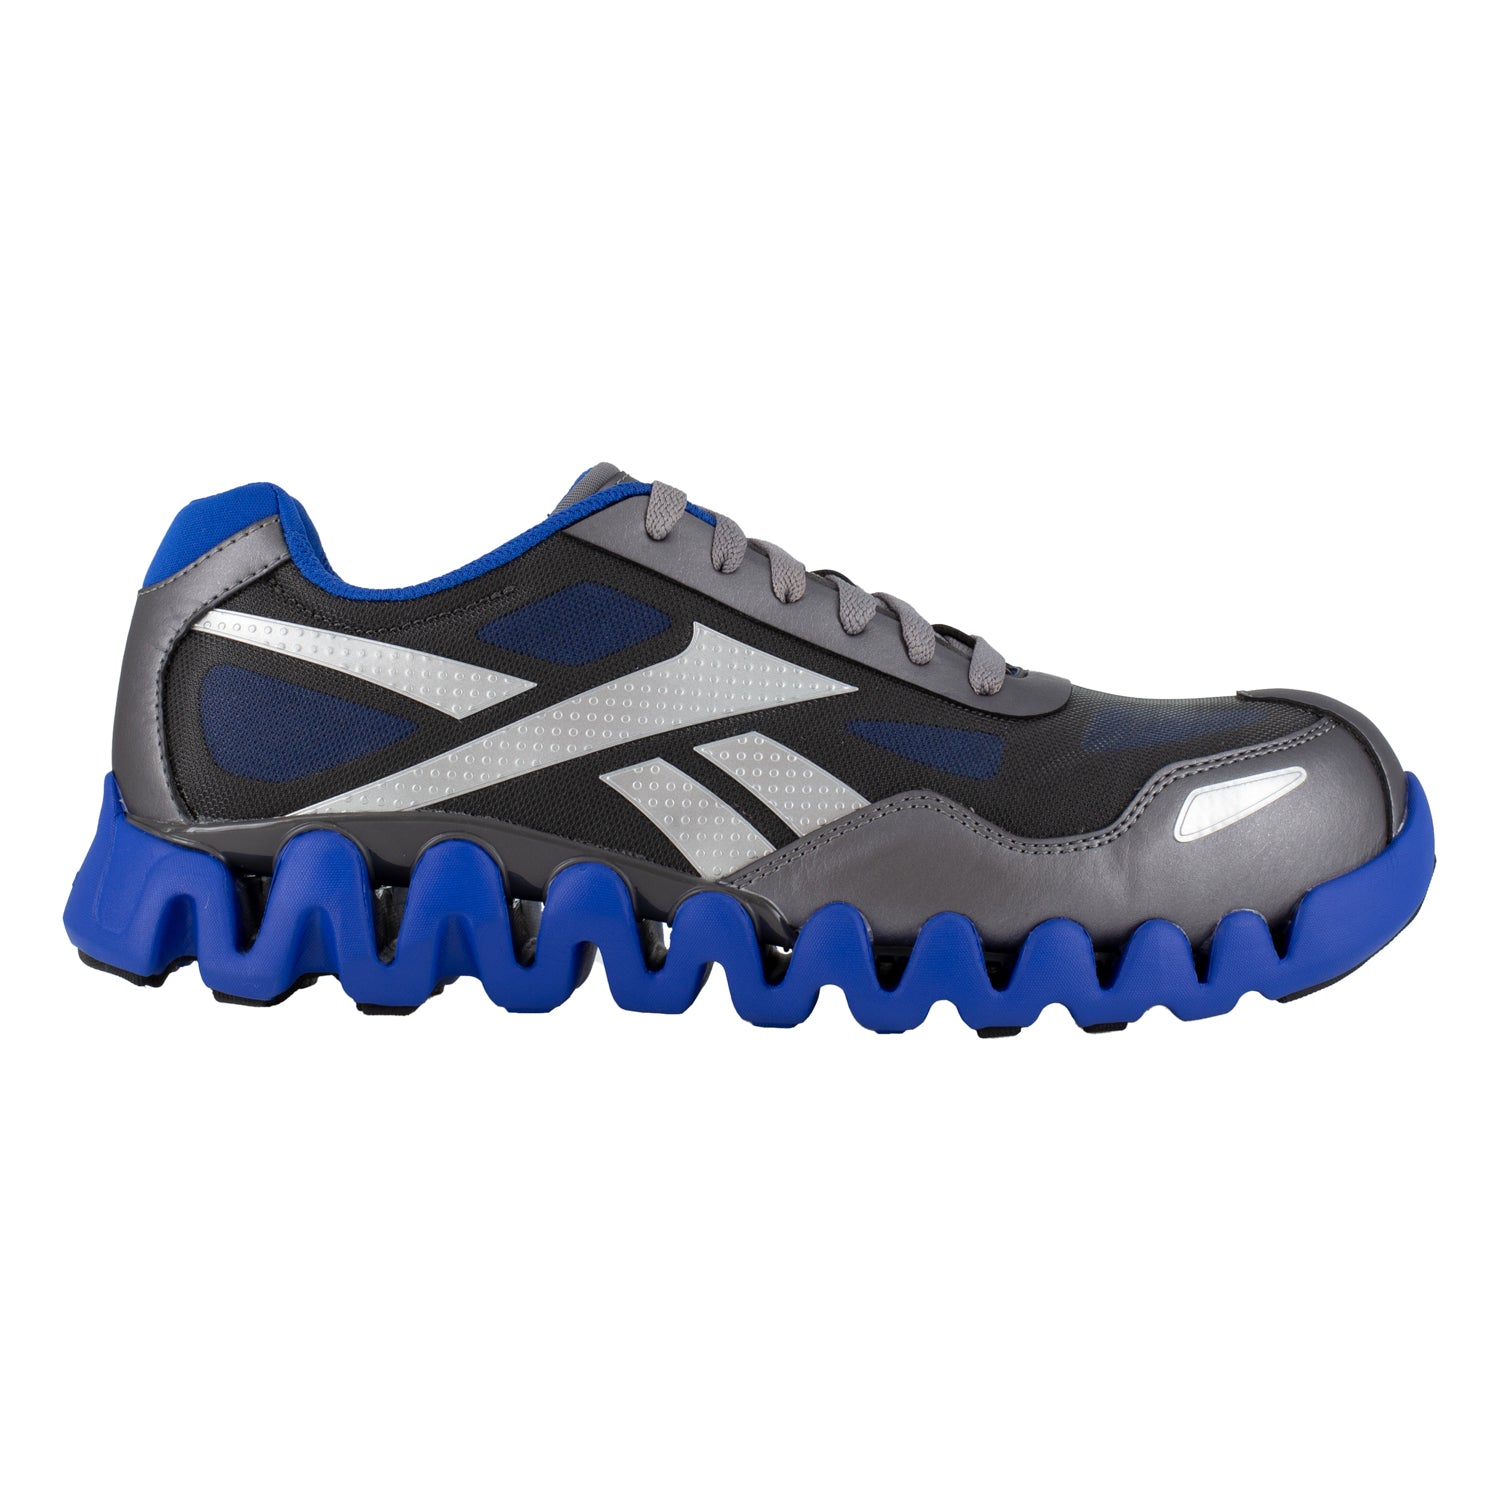 Grey/Blue The Mens Work Pulse Company Shoes CT Athletic Western Zig Reebok Mesh –